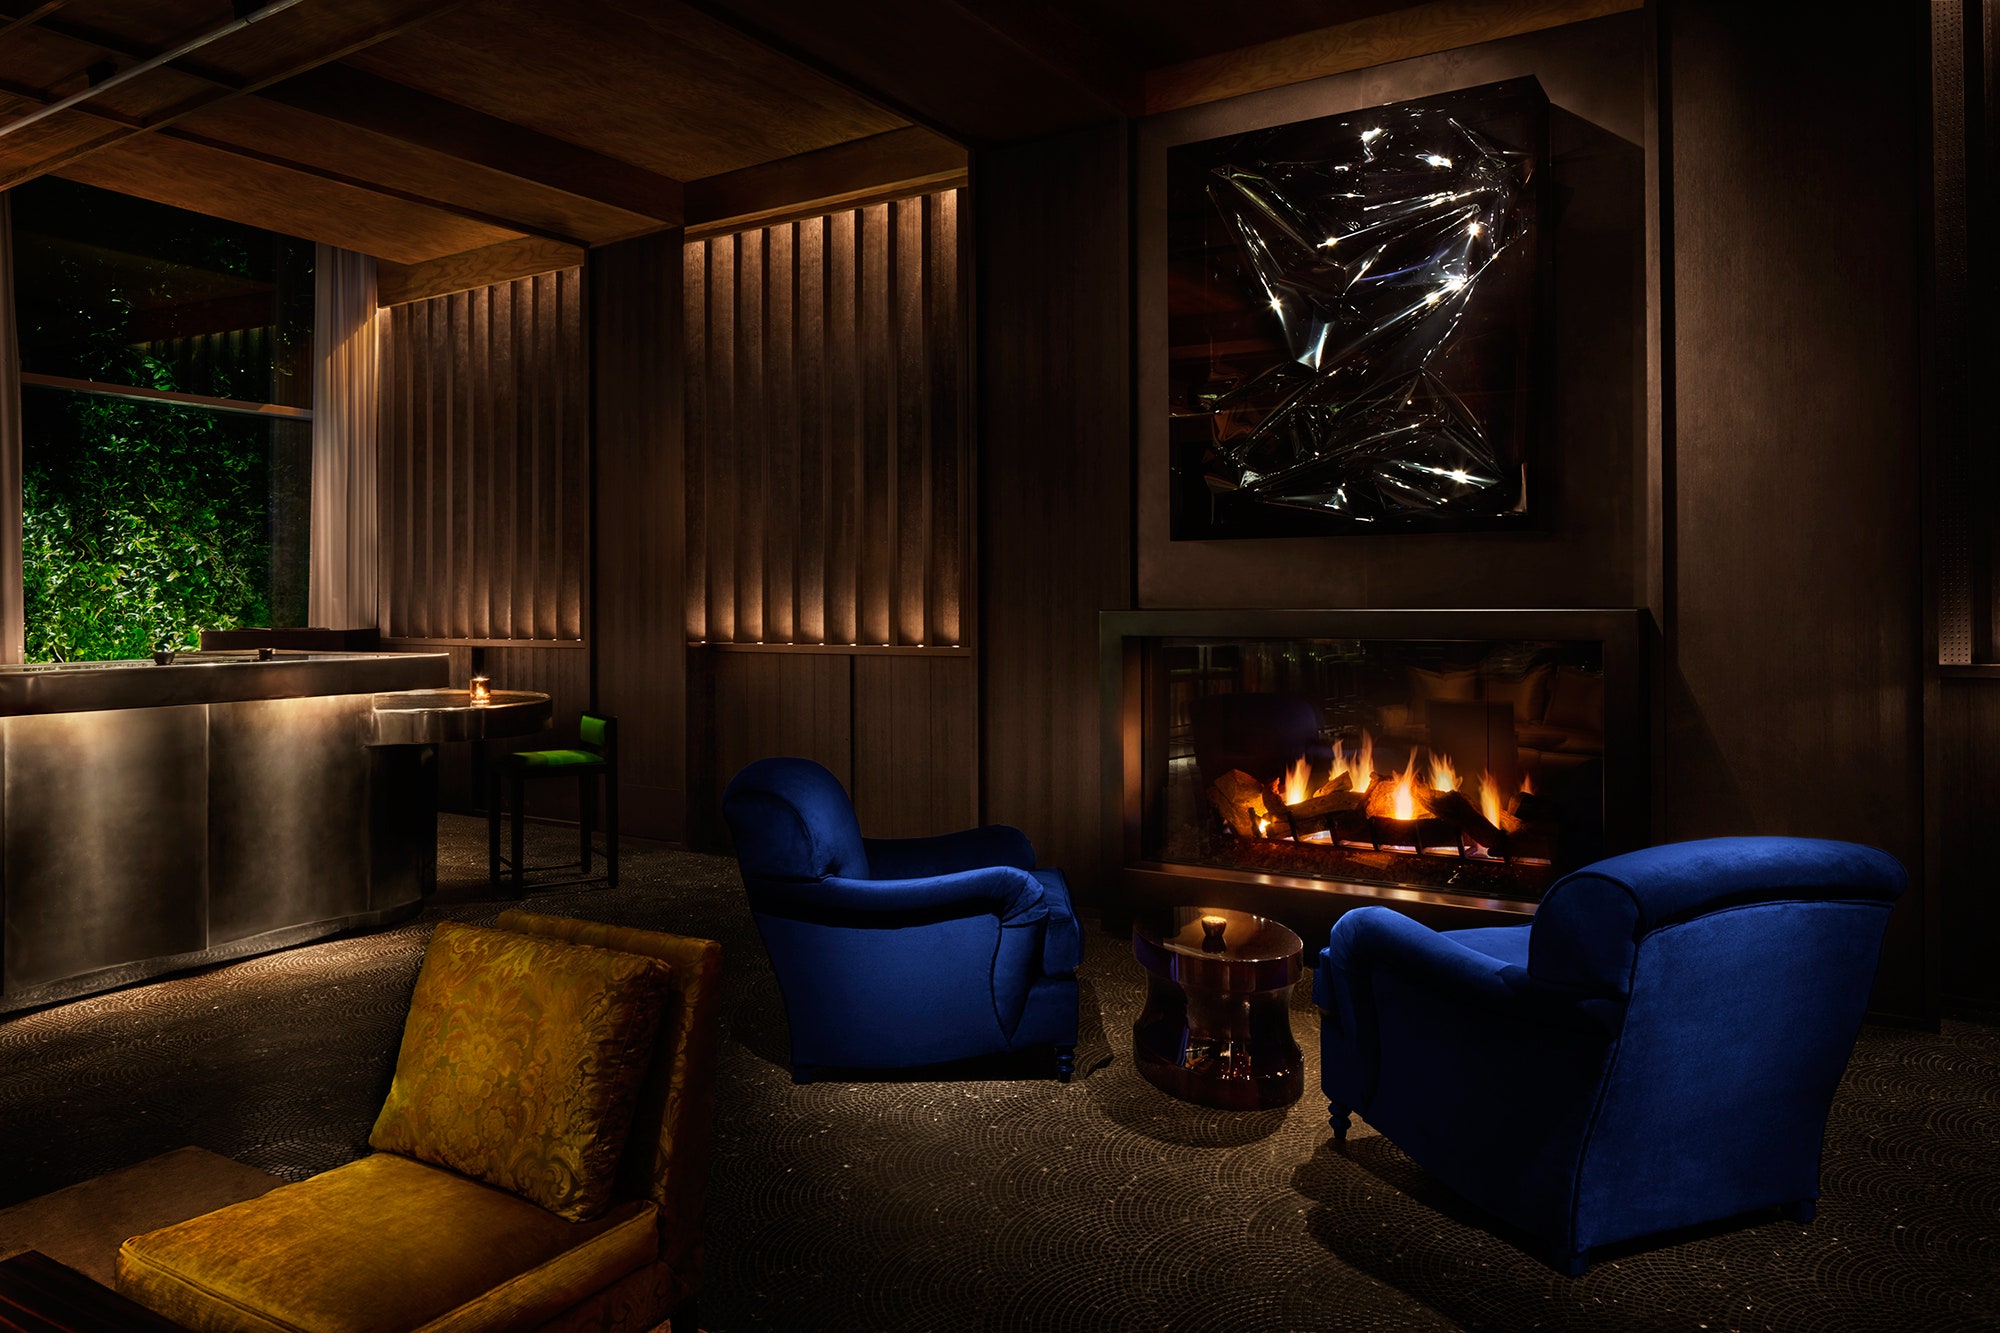 02-best-bars-with-fireplaces.jpg